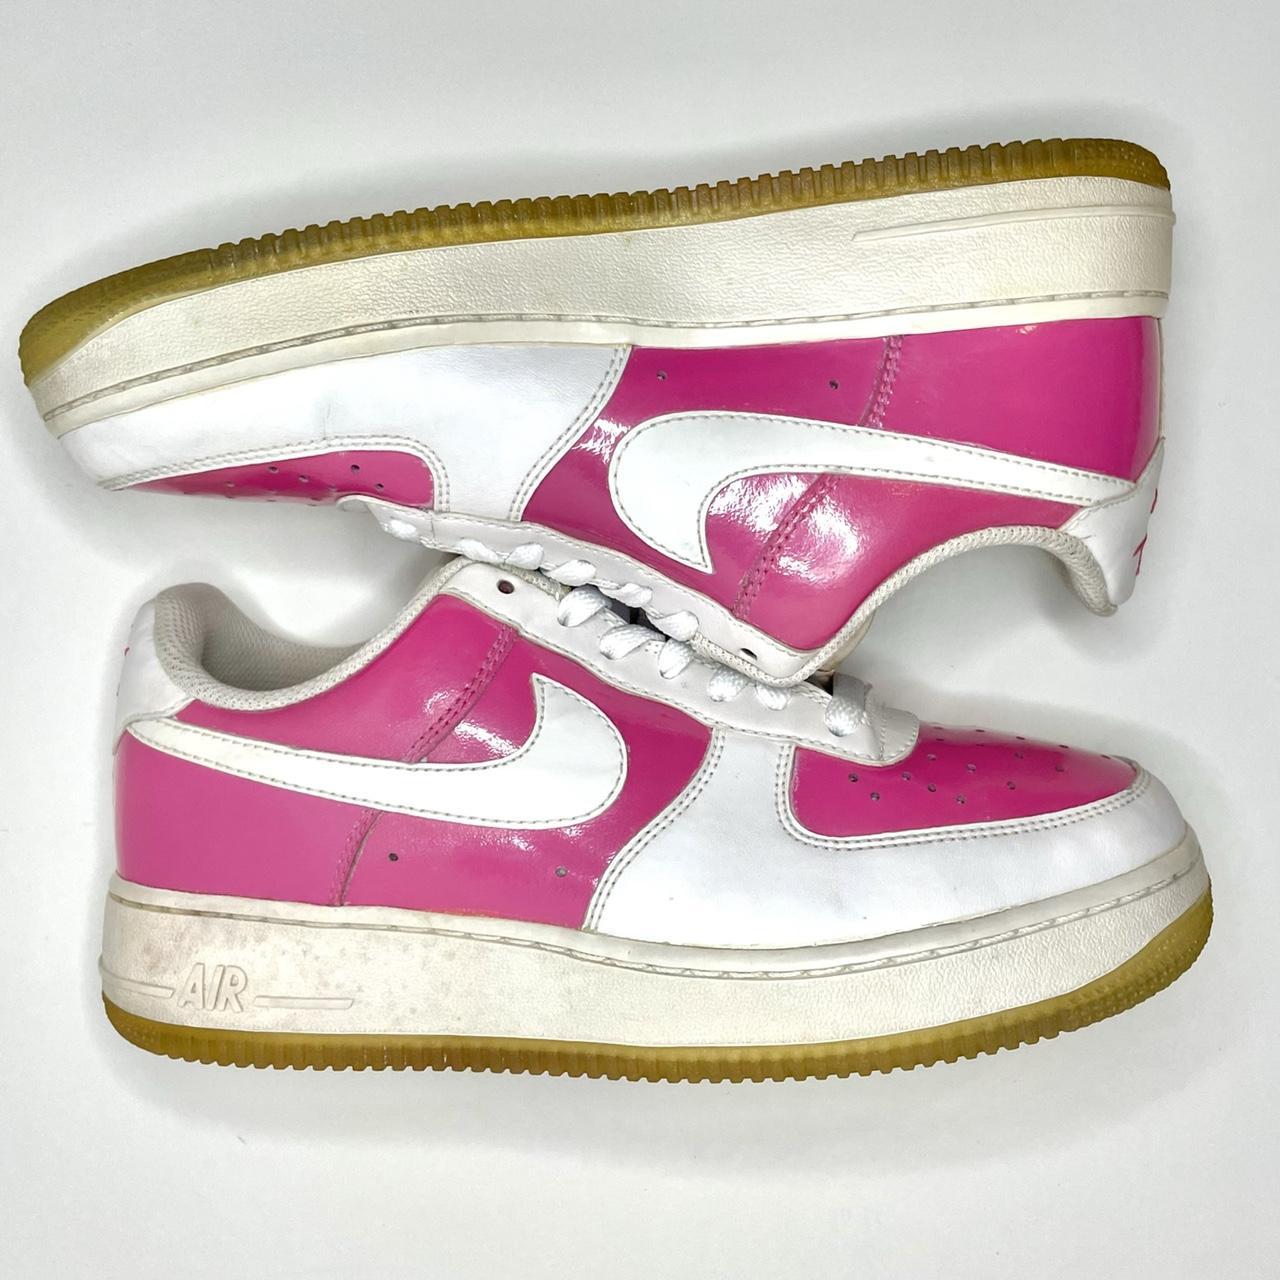 Nike WMNS Air Force 1 Valentines Day 2008 